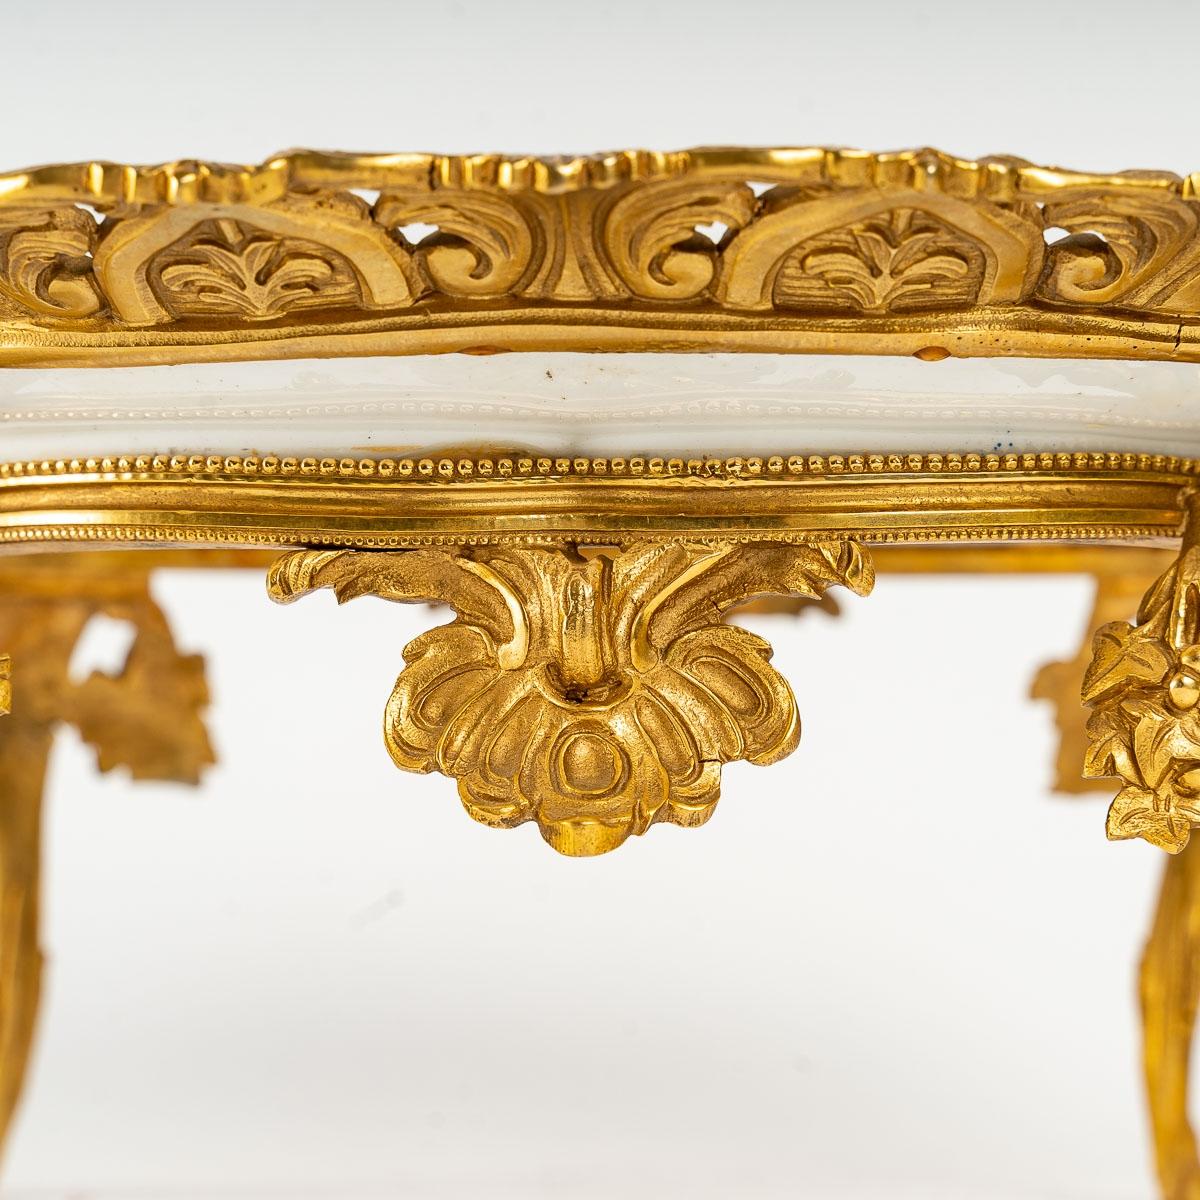 Gilt Cup in 19th Century Sèvres Porcelain, Napoleon III Period. For Sale